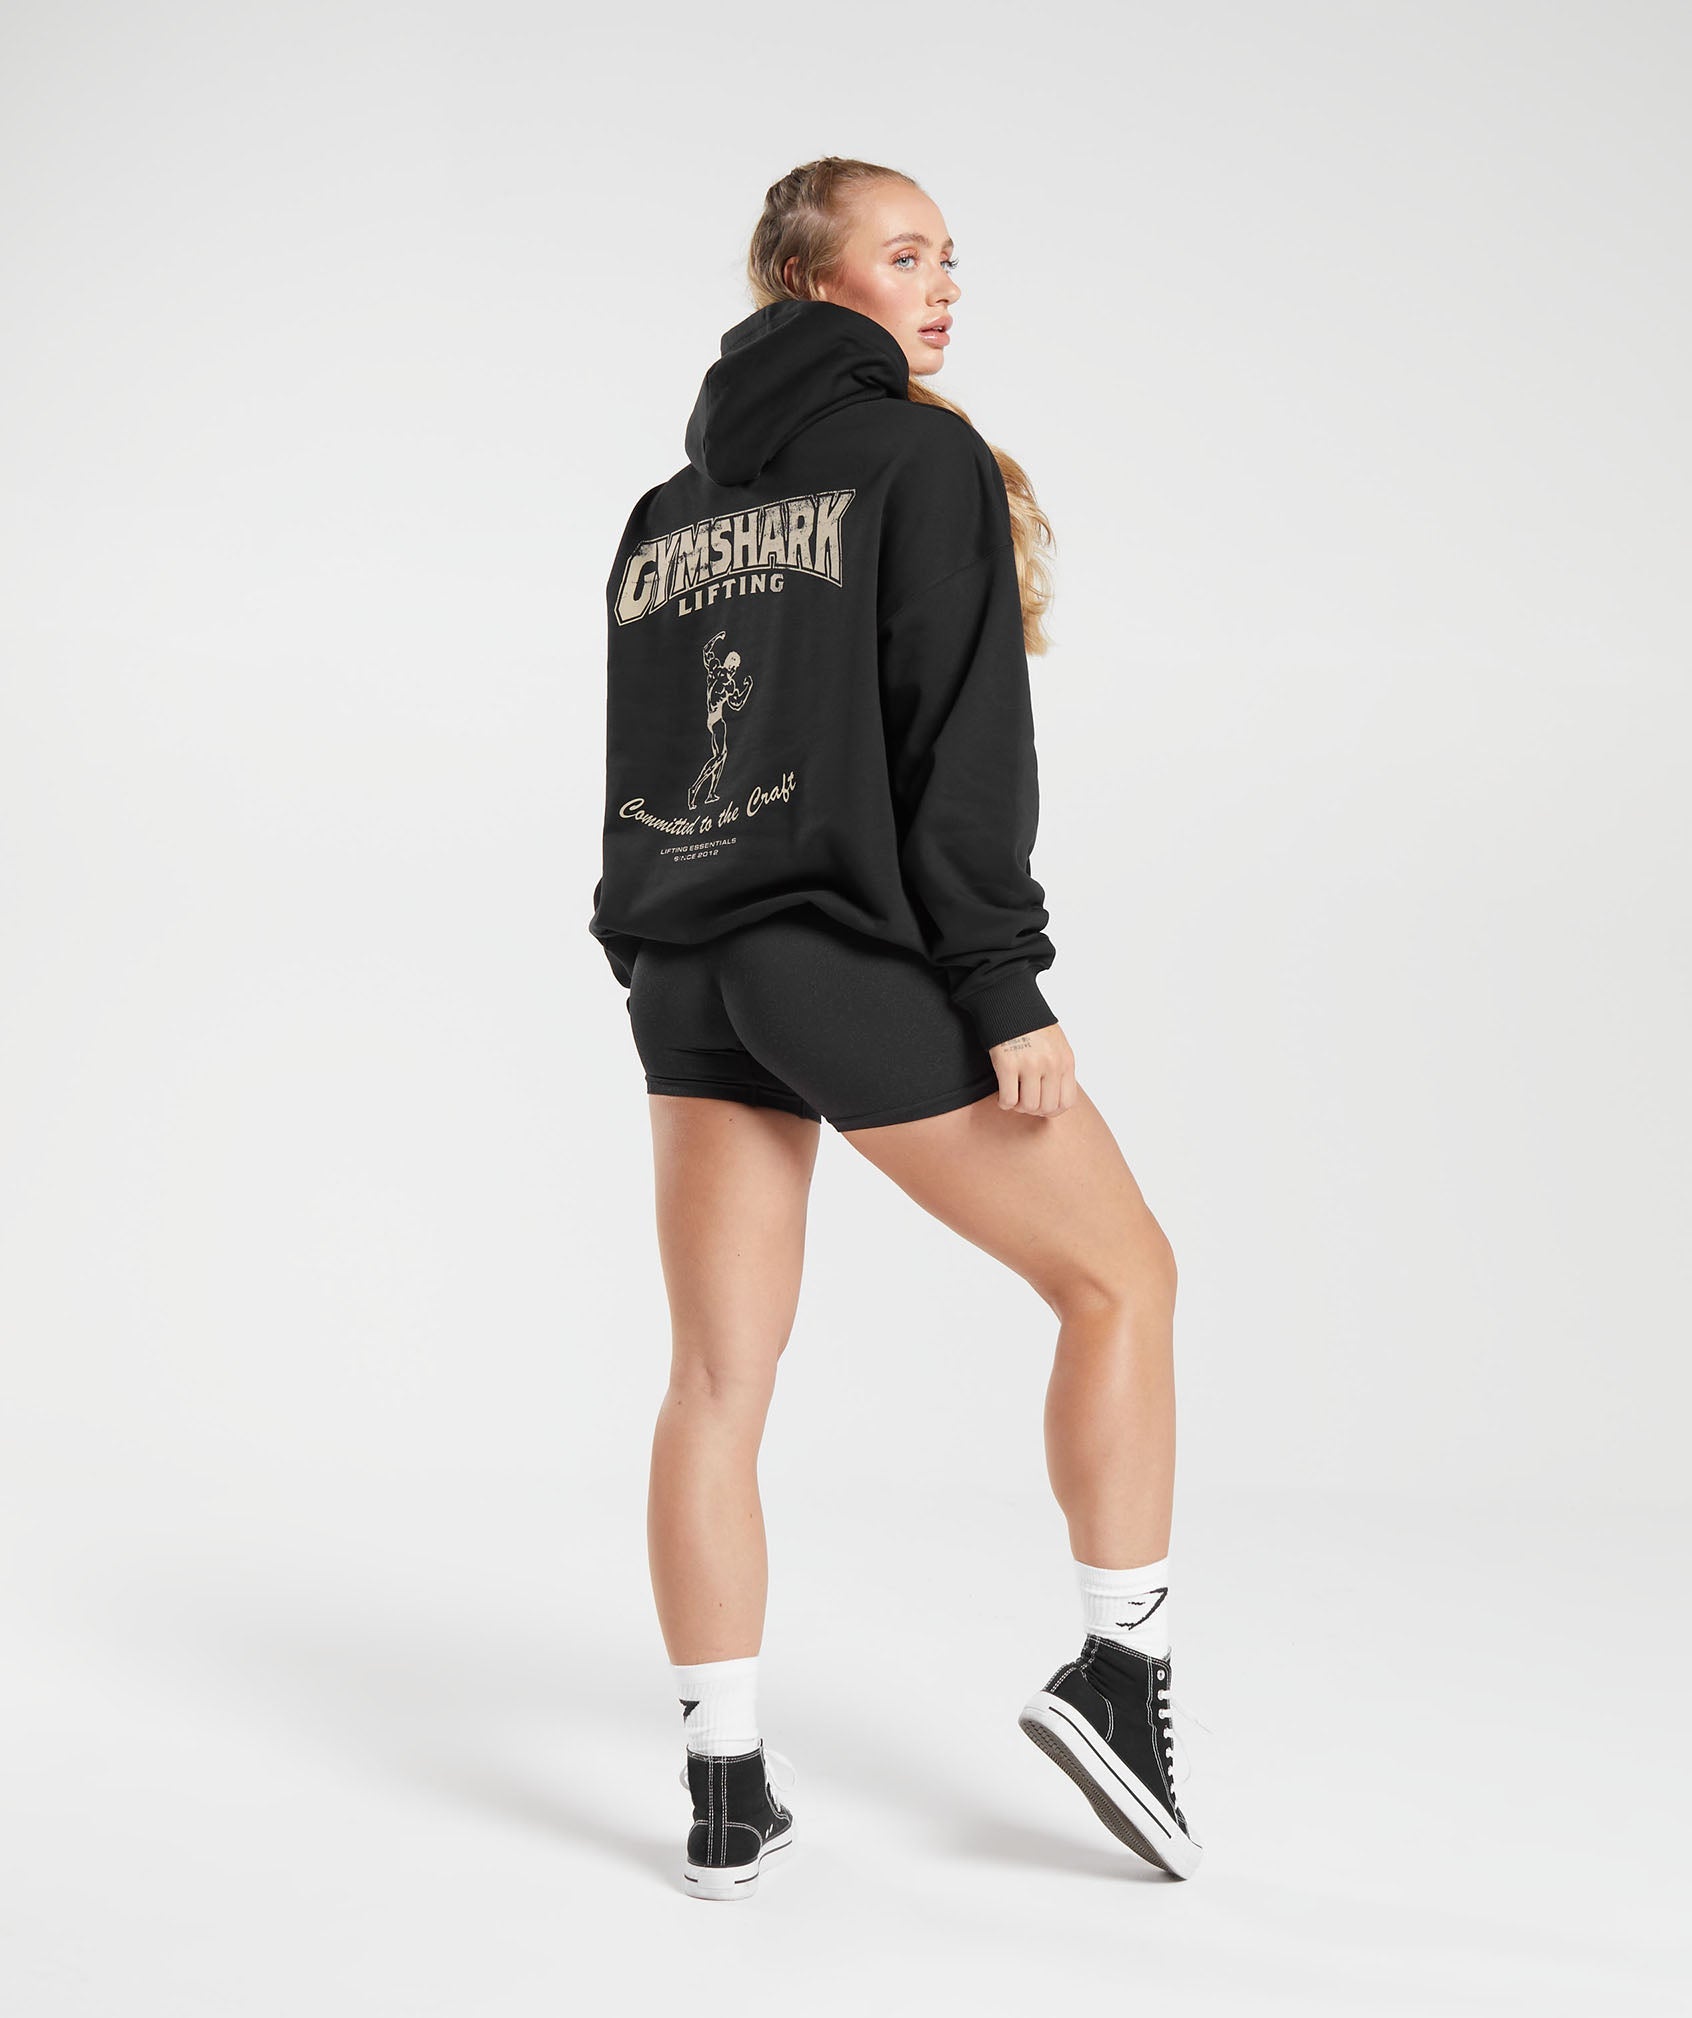 Committed To The Craft Hoodie in Black - view 4